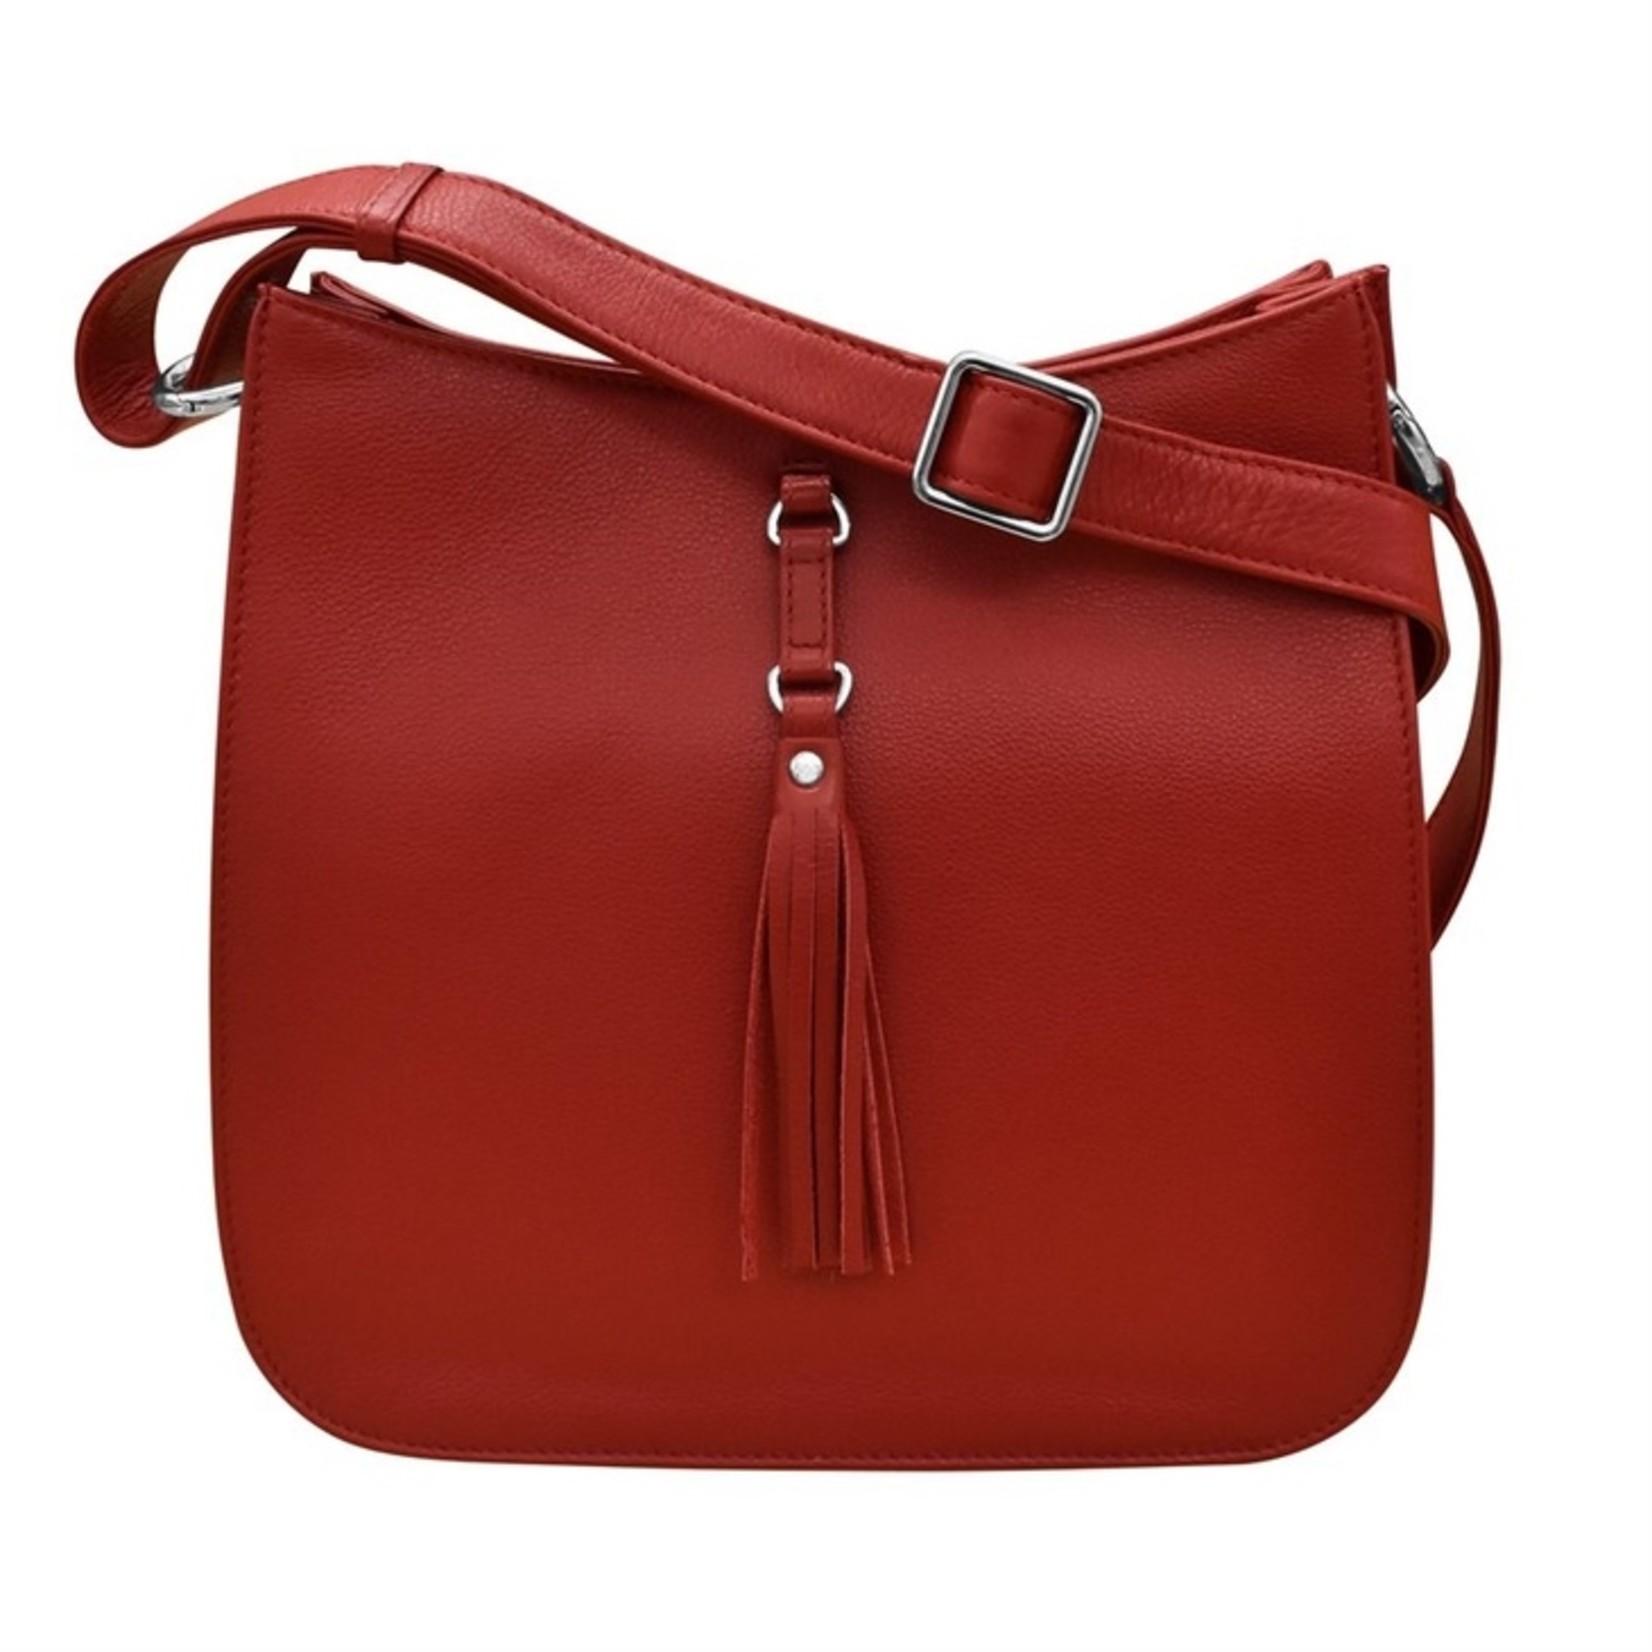 Leather Handbags and Accessories 6888 Red - Feed Bag with Tassel